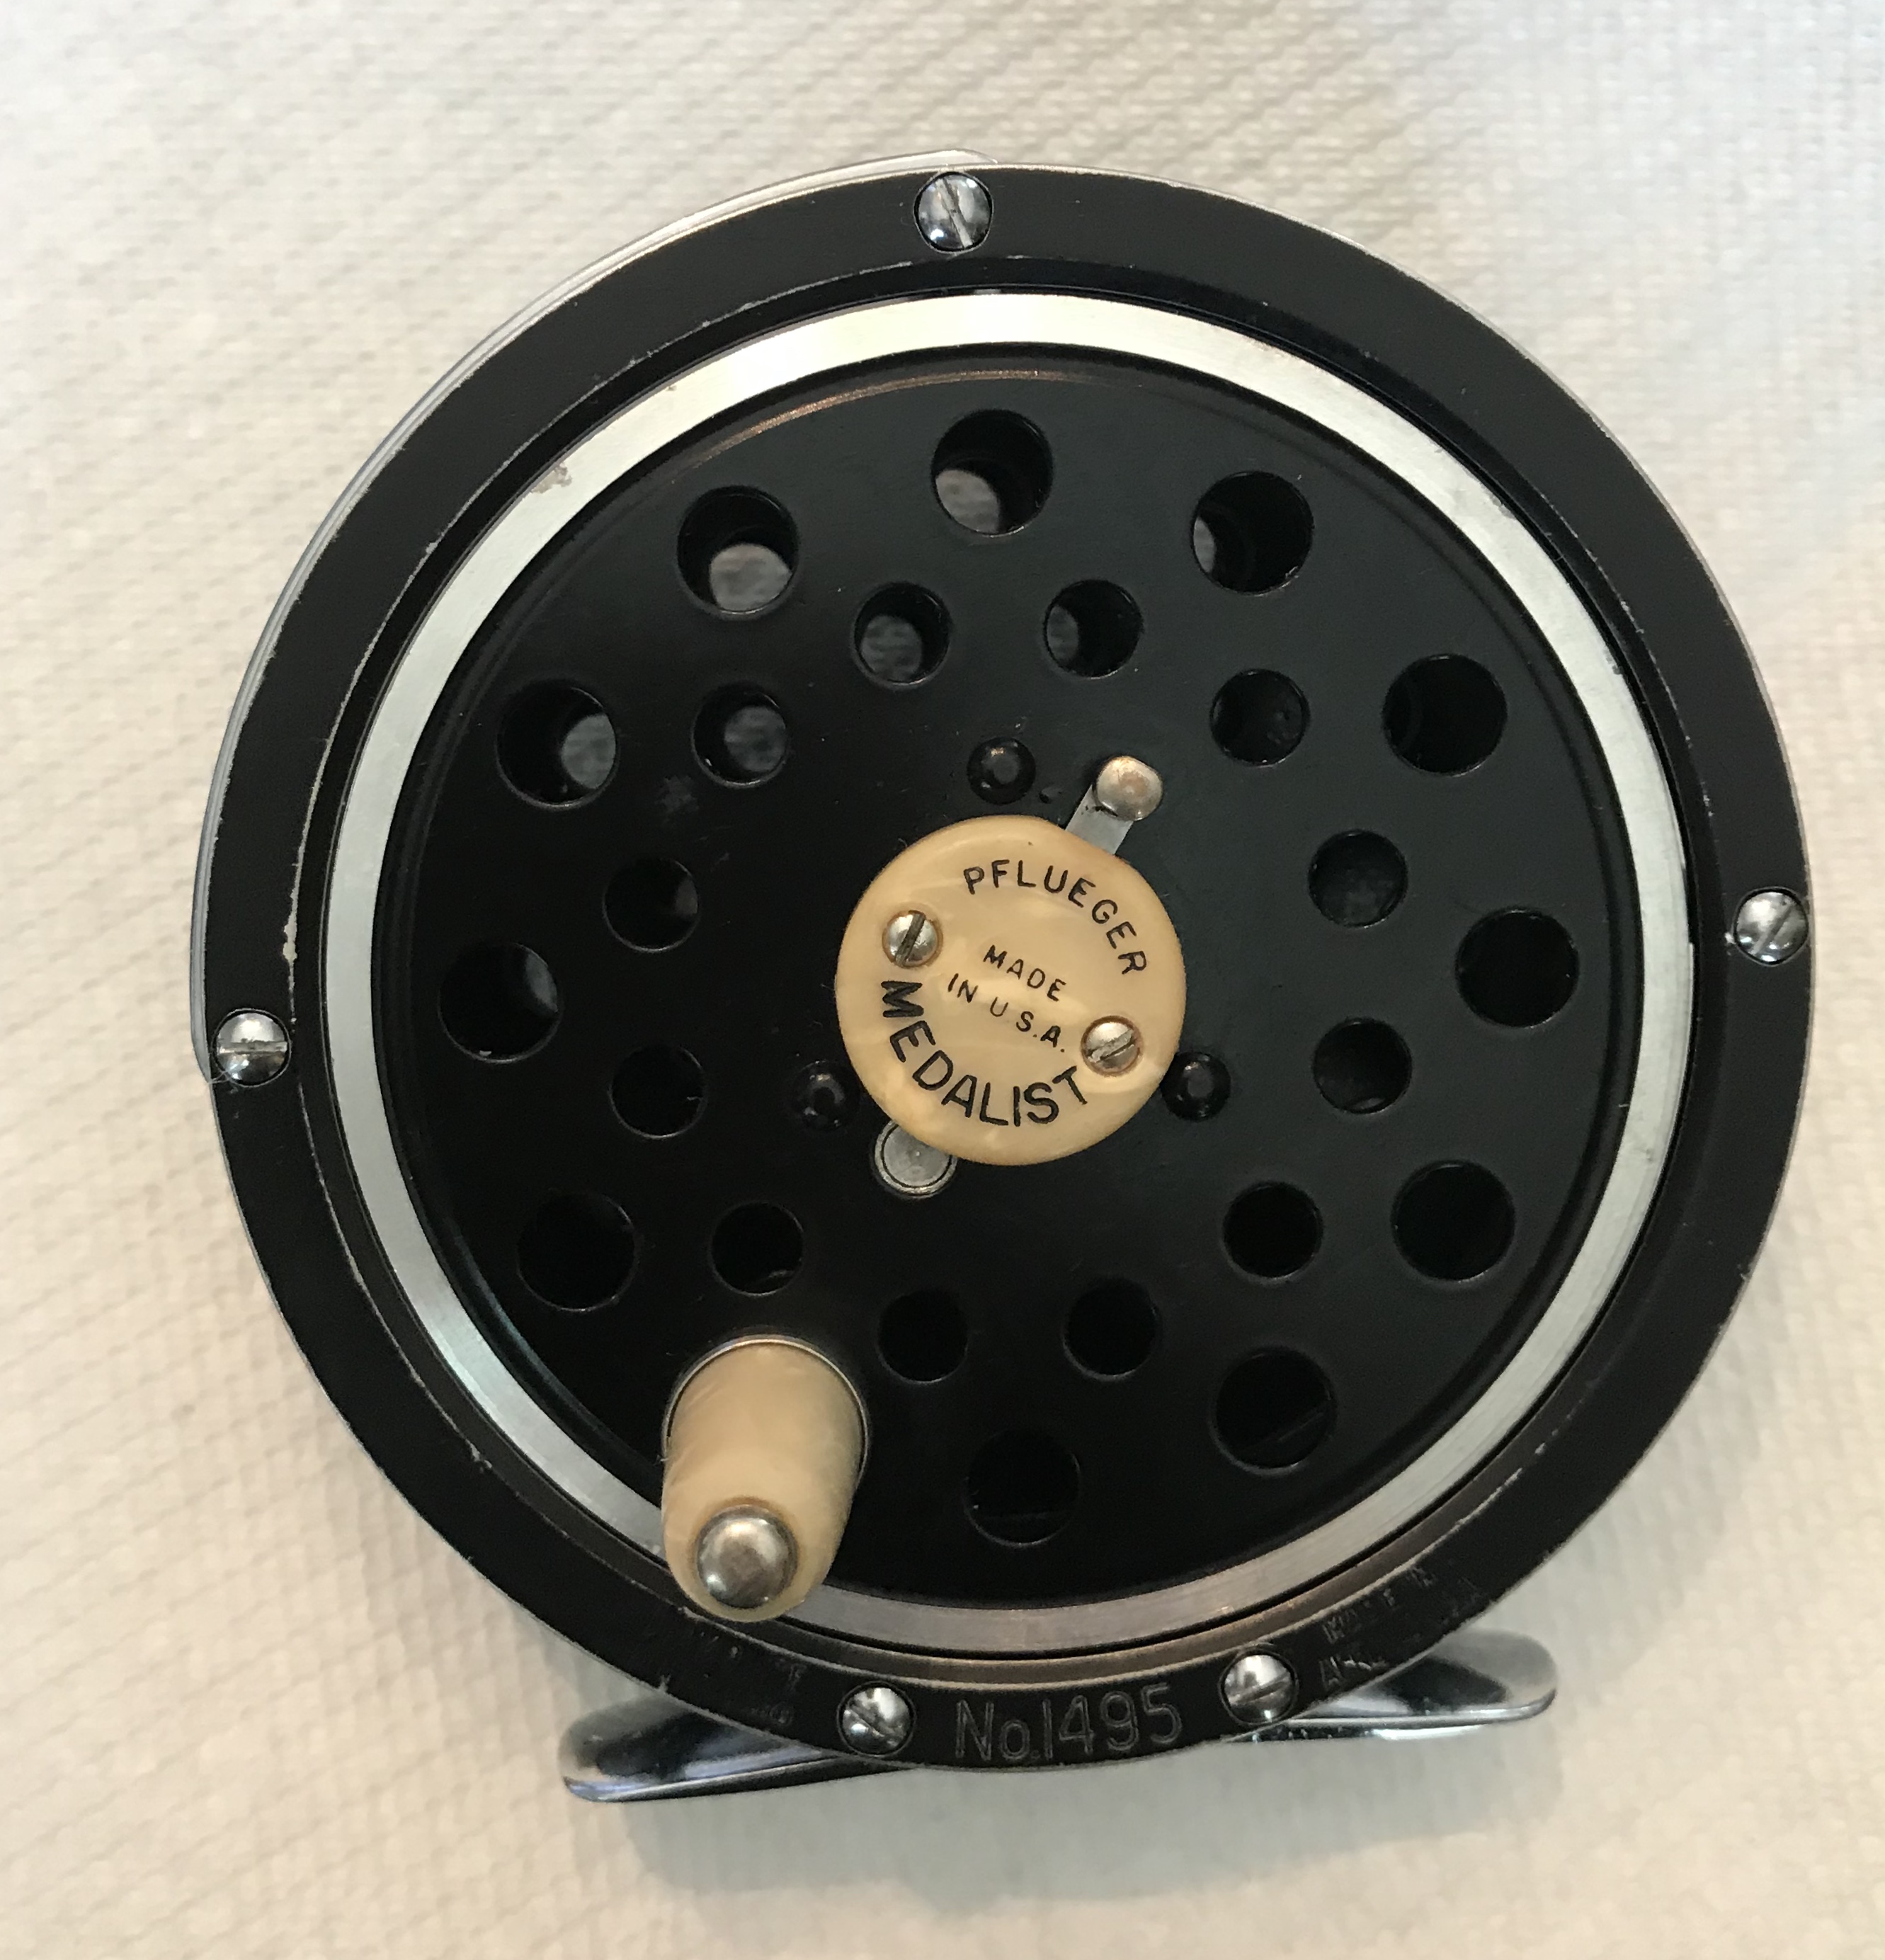 Please tell me about these old Medalists, Classic Fly Reels